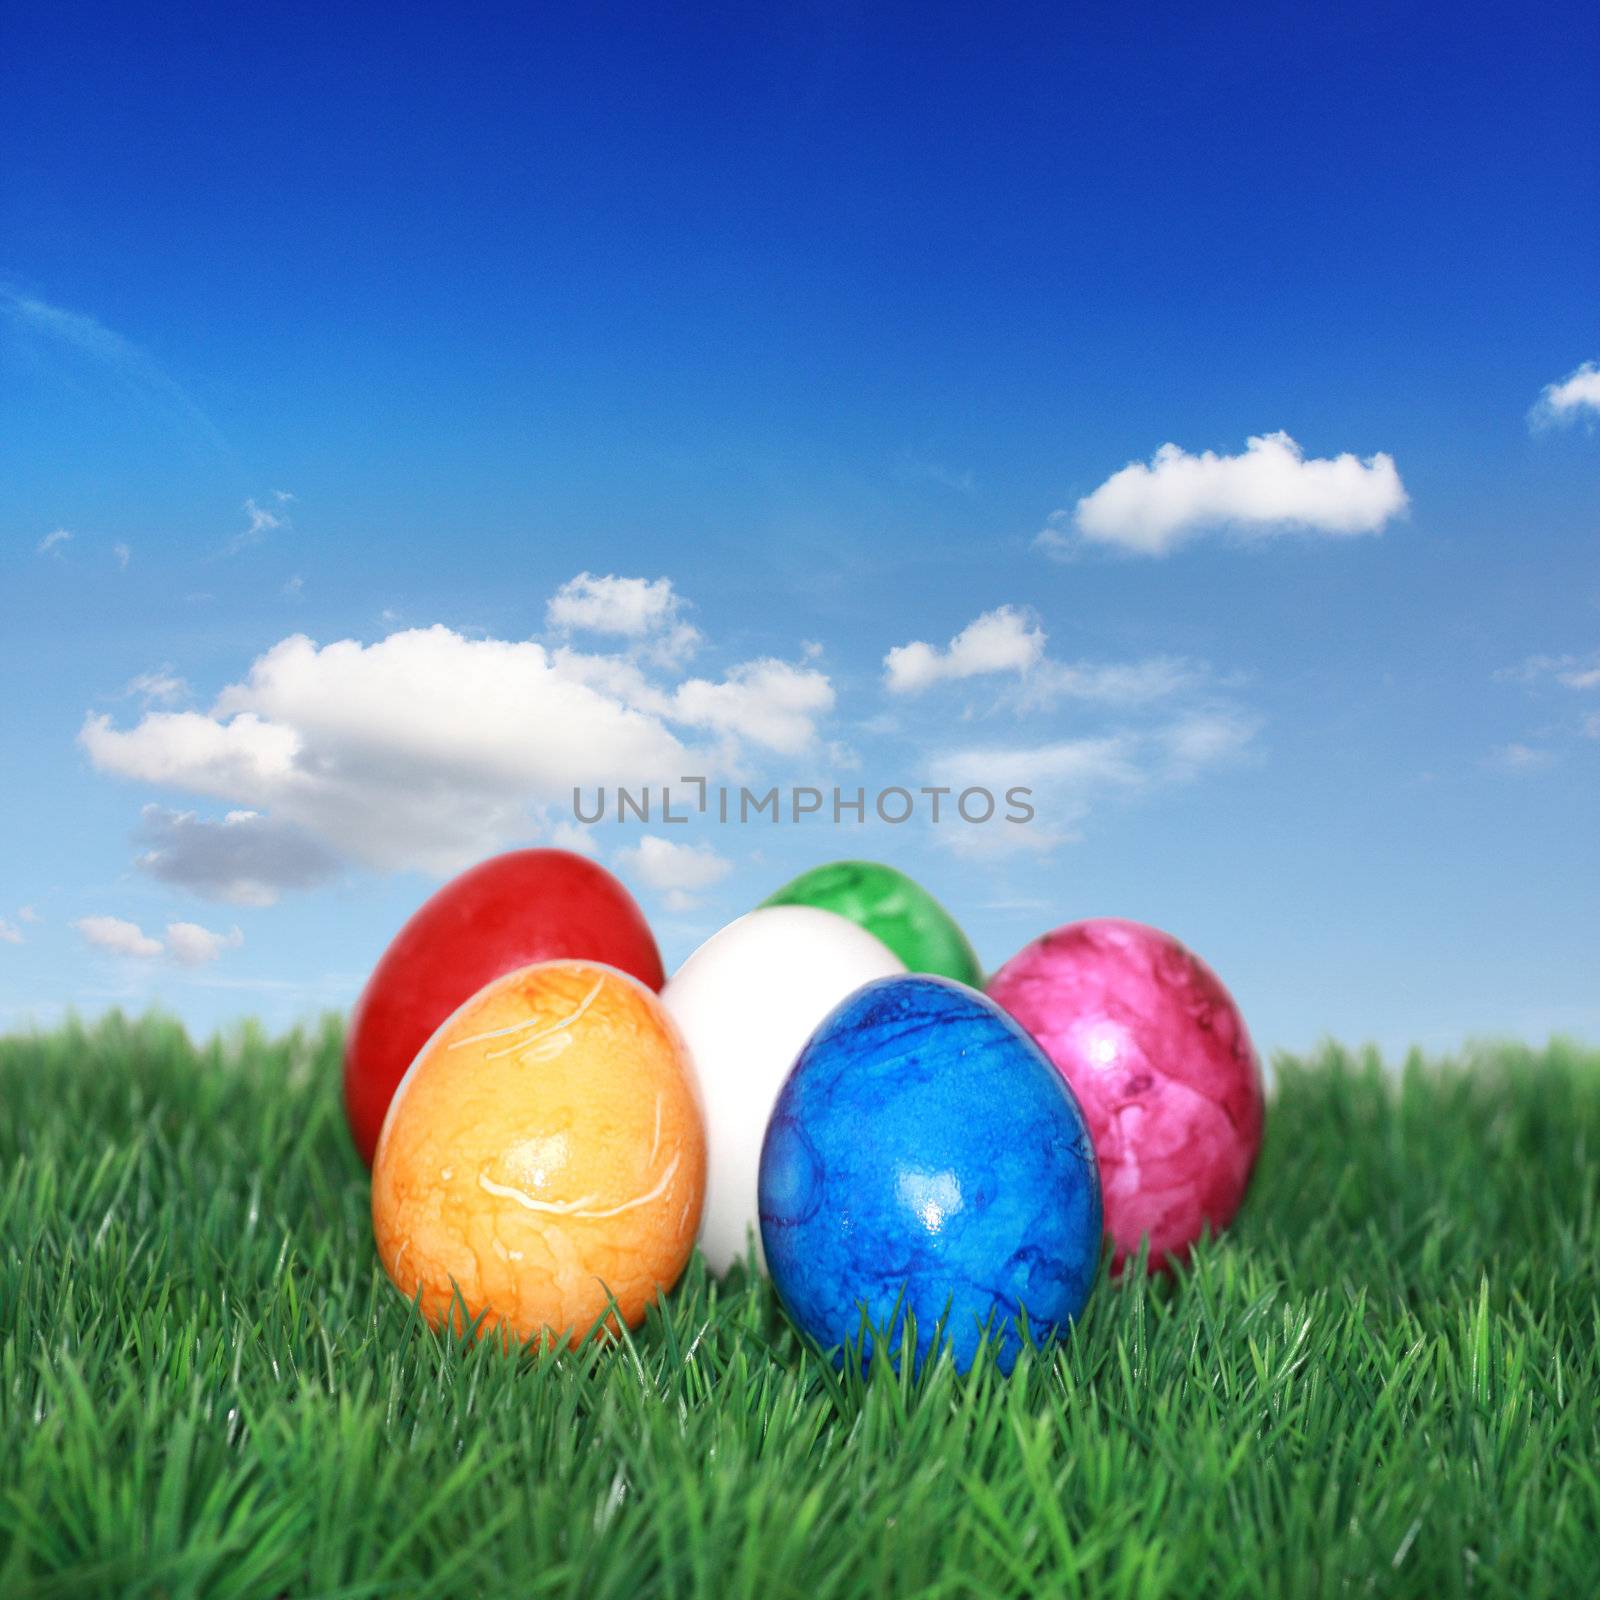 Colorful Easter egg mix by photochecker